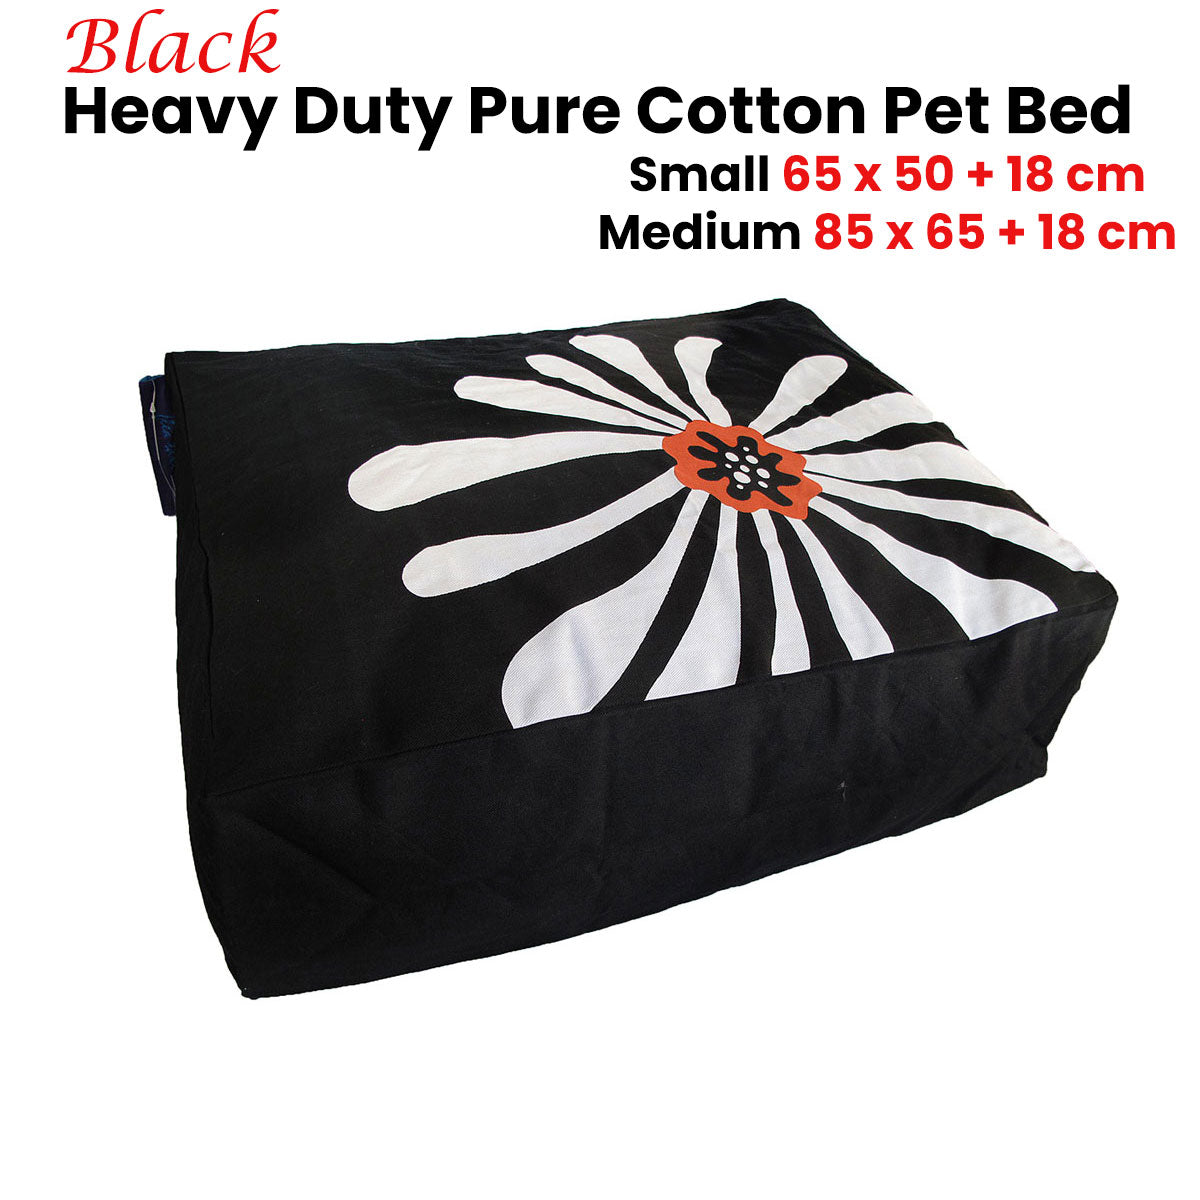 Heavy Duty Pure Cotton Pet Dog Bed Cover Small Black